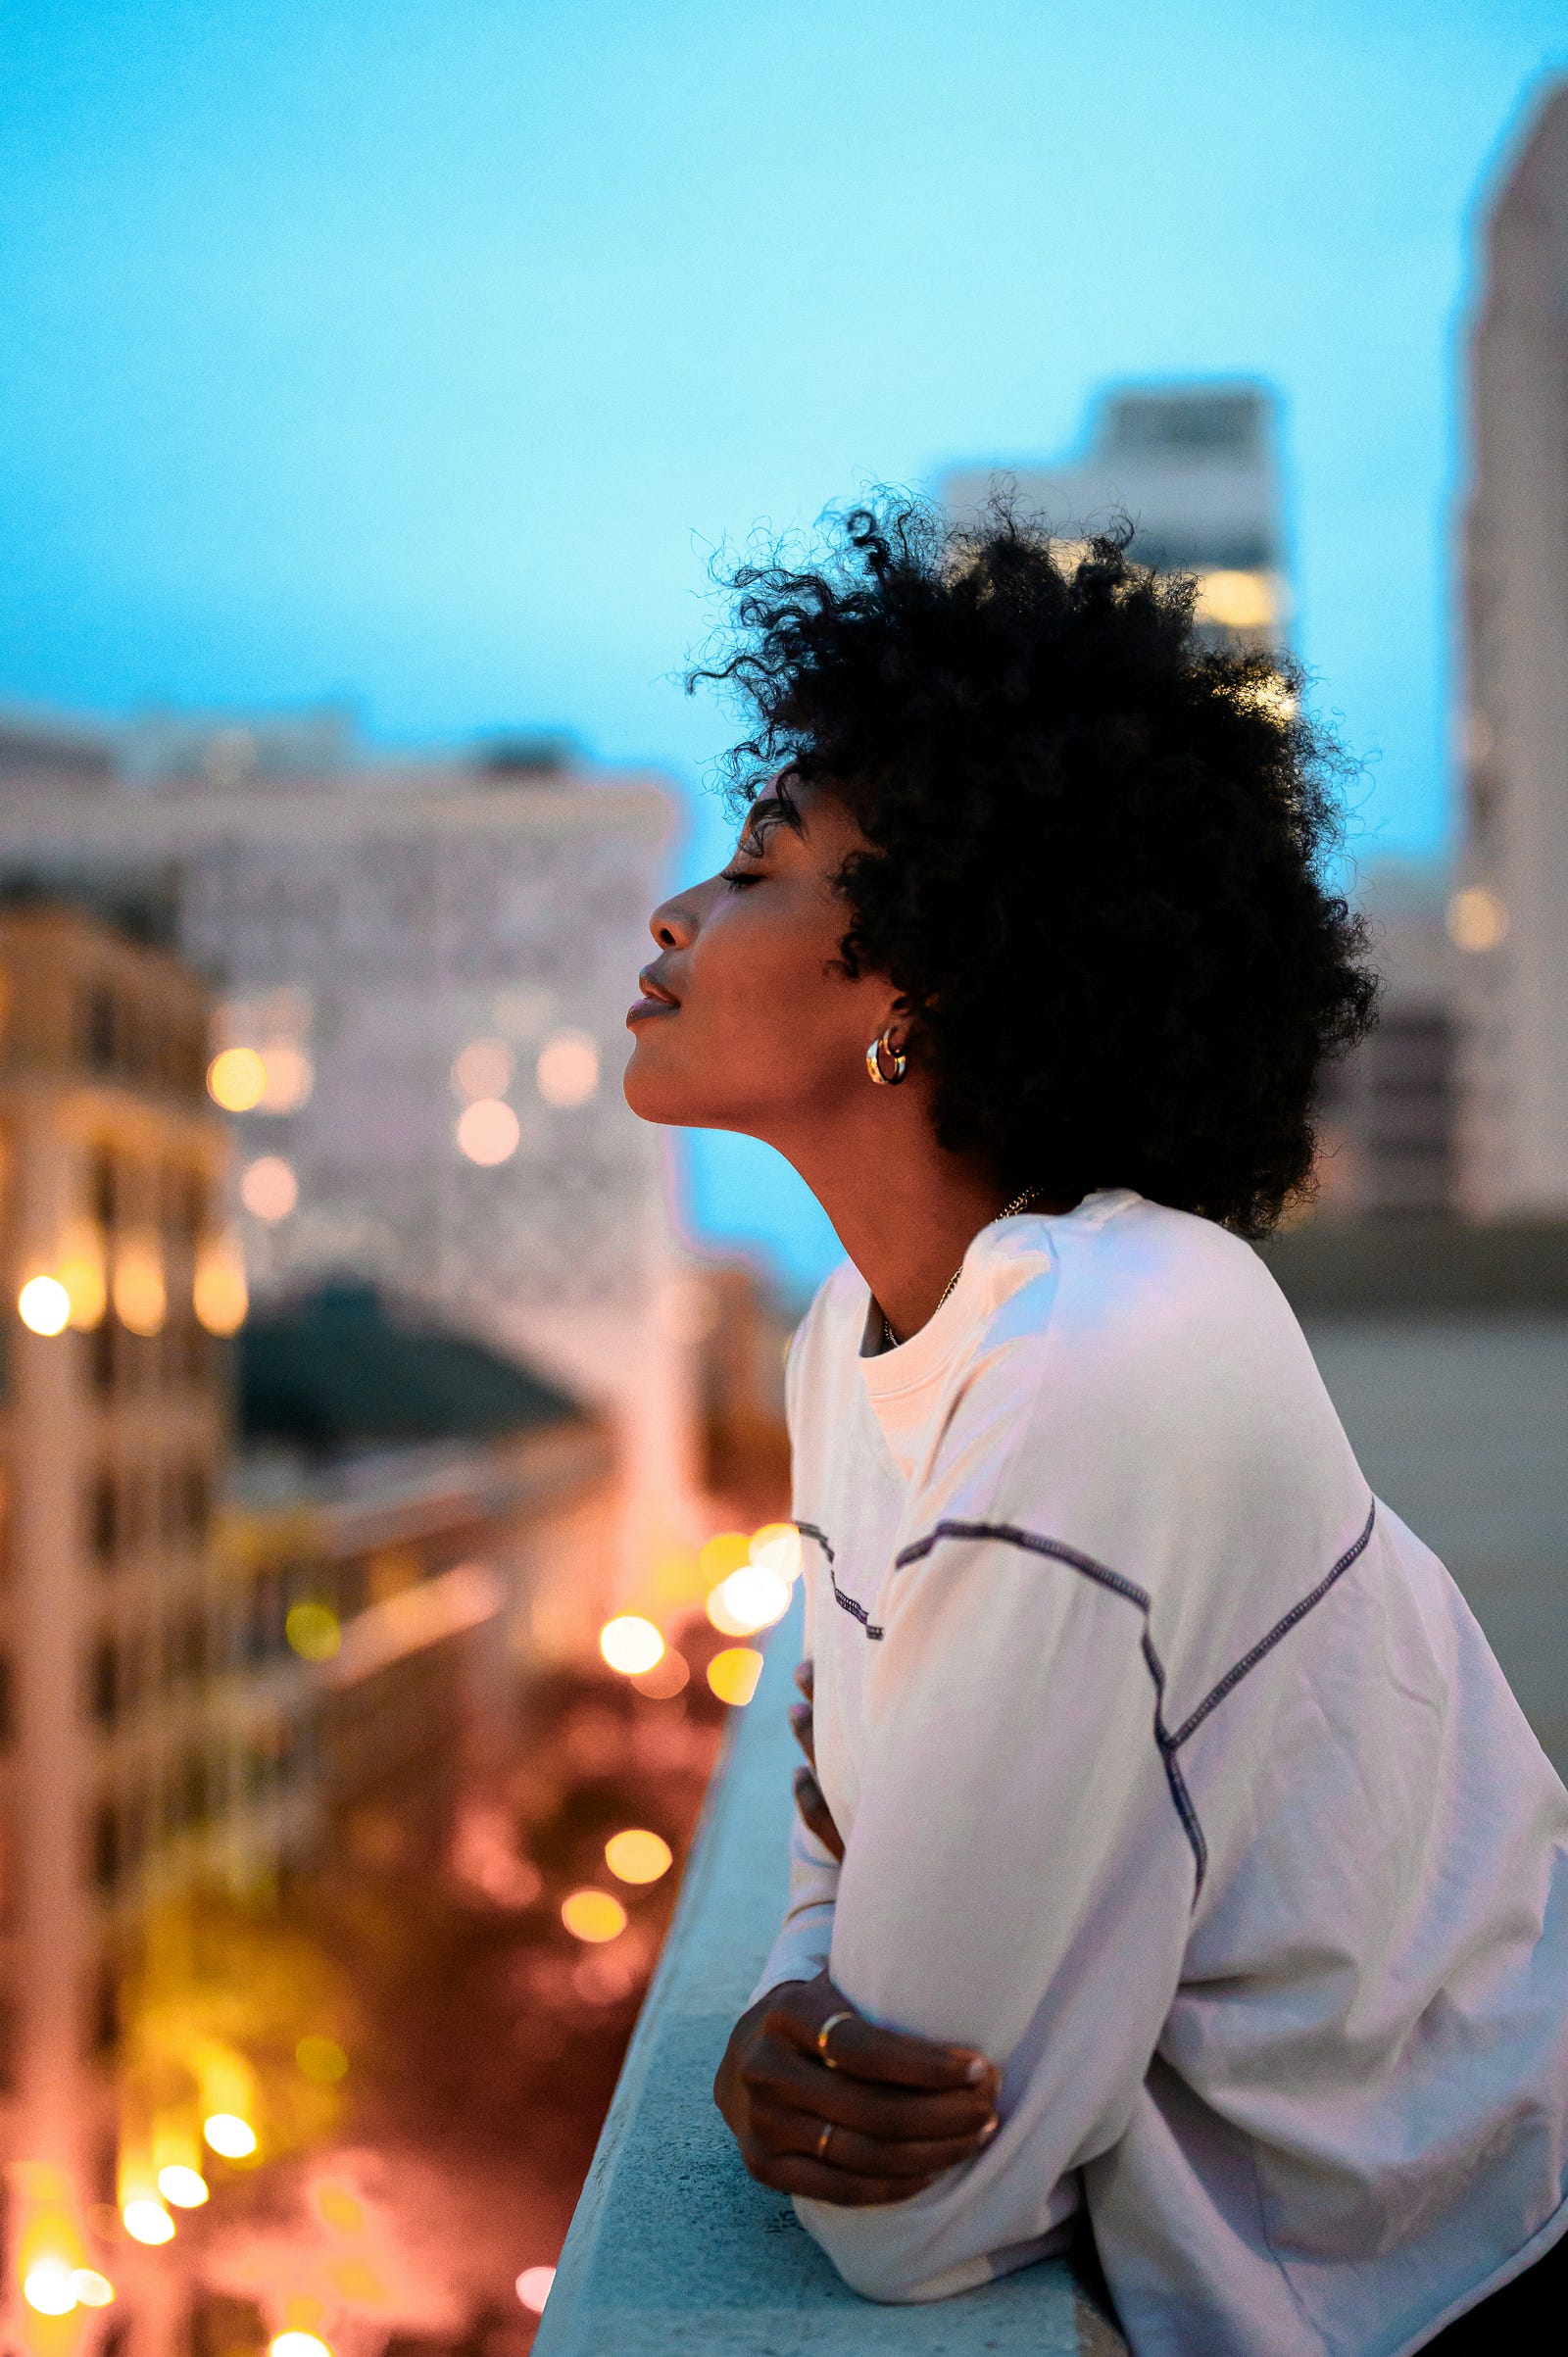 A young black woman looks to the left of a cityscape. Black women are less likely to get breast cancer, but more likely to die from it than other races in the United States.